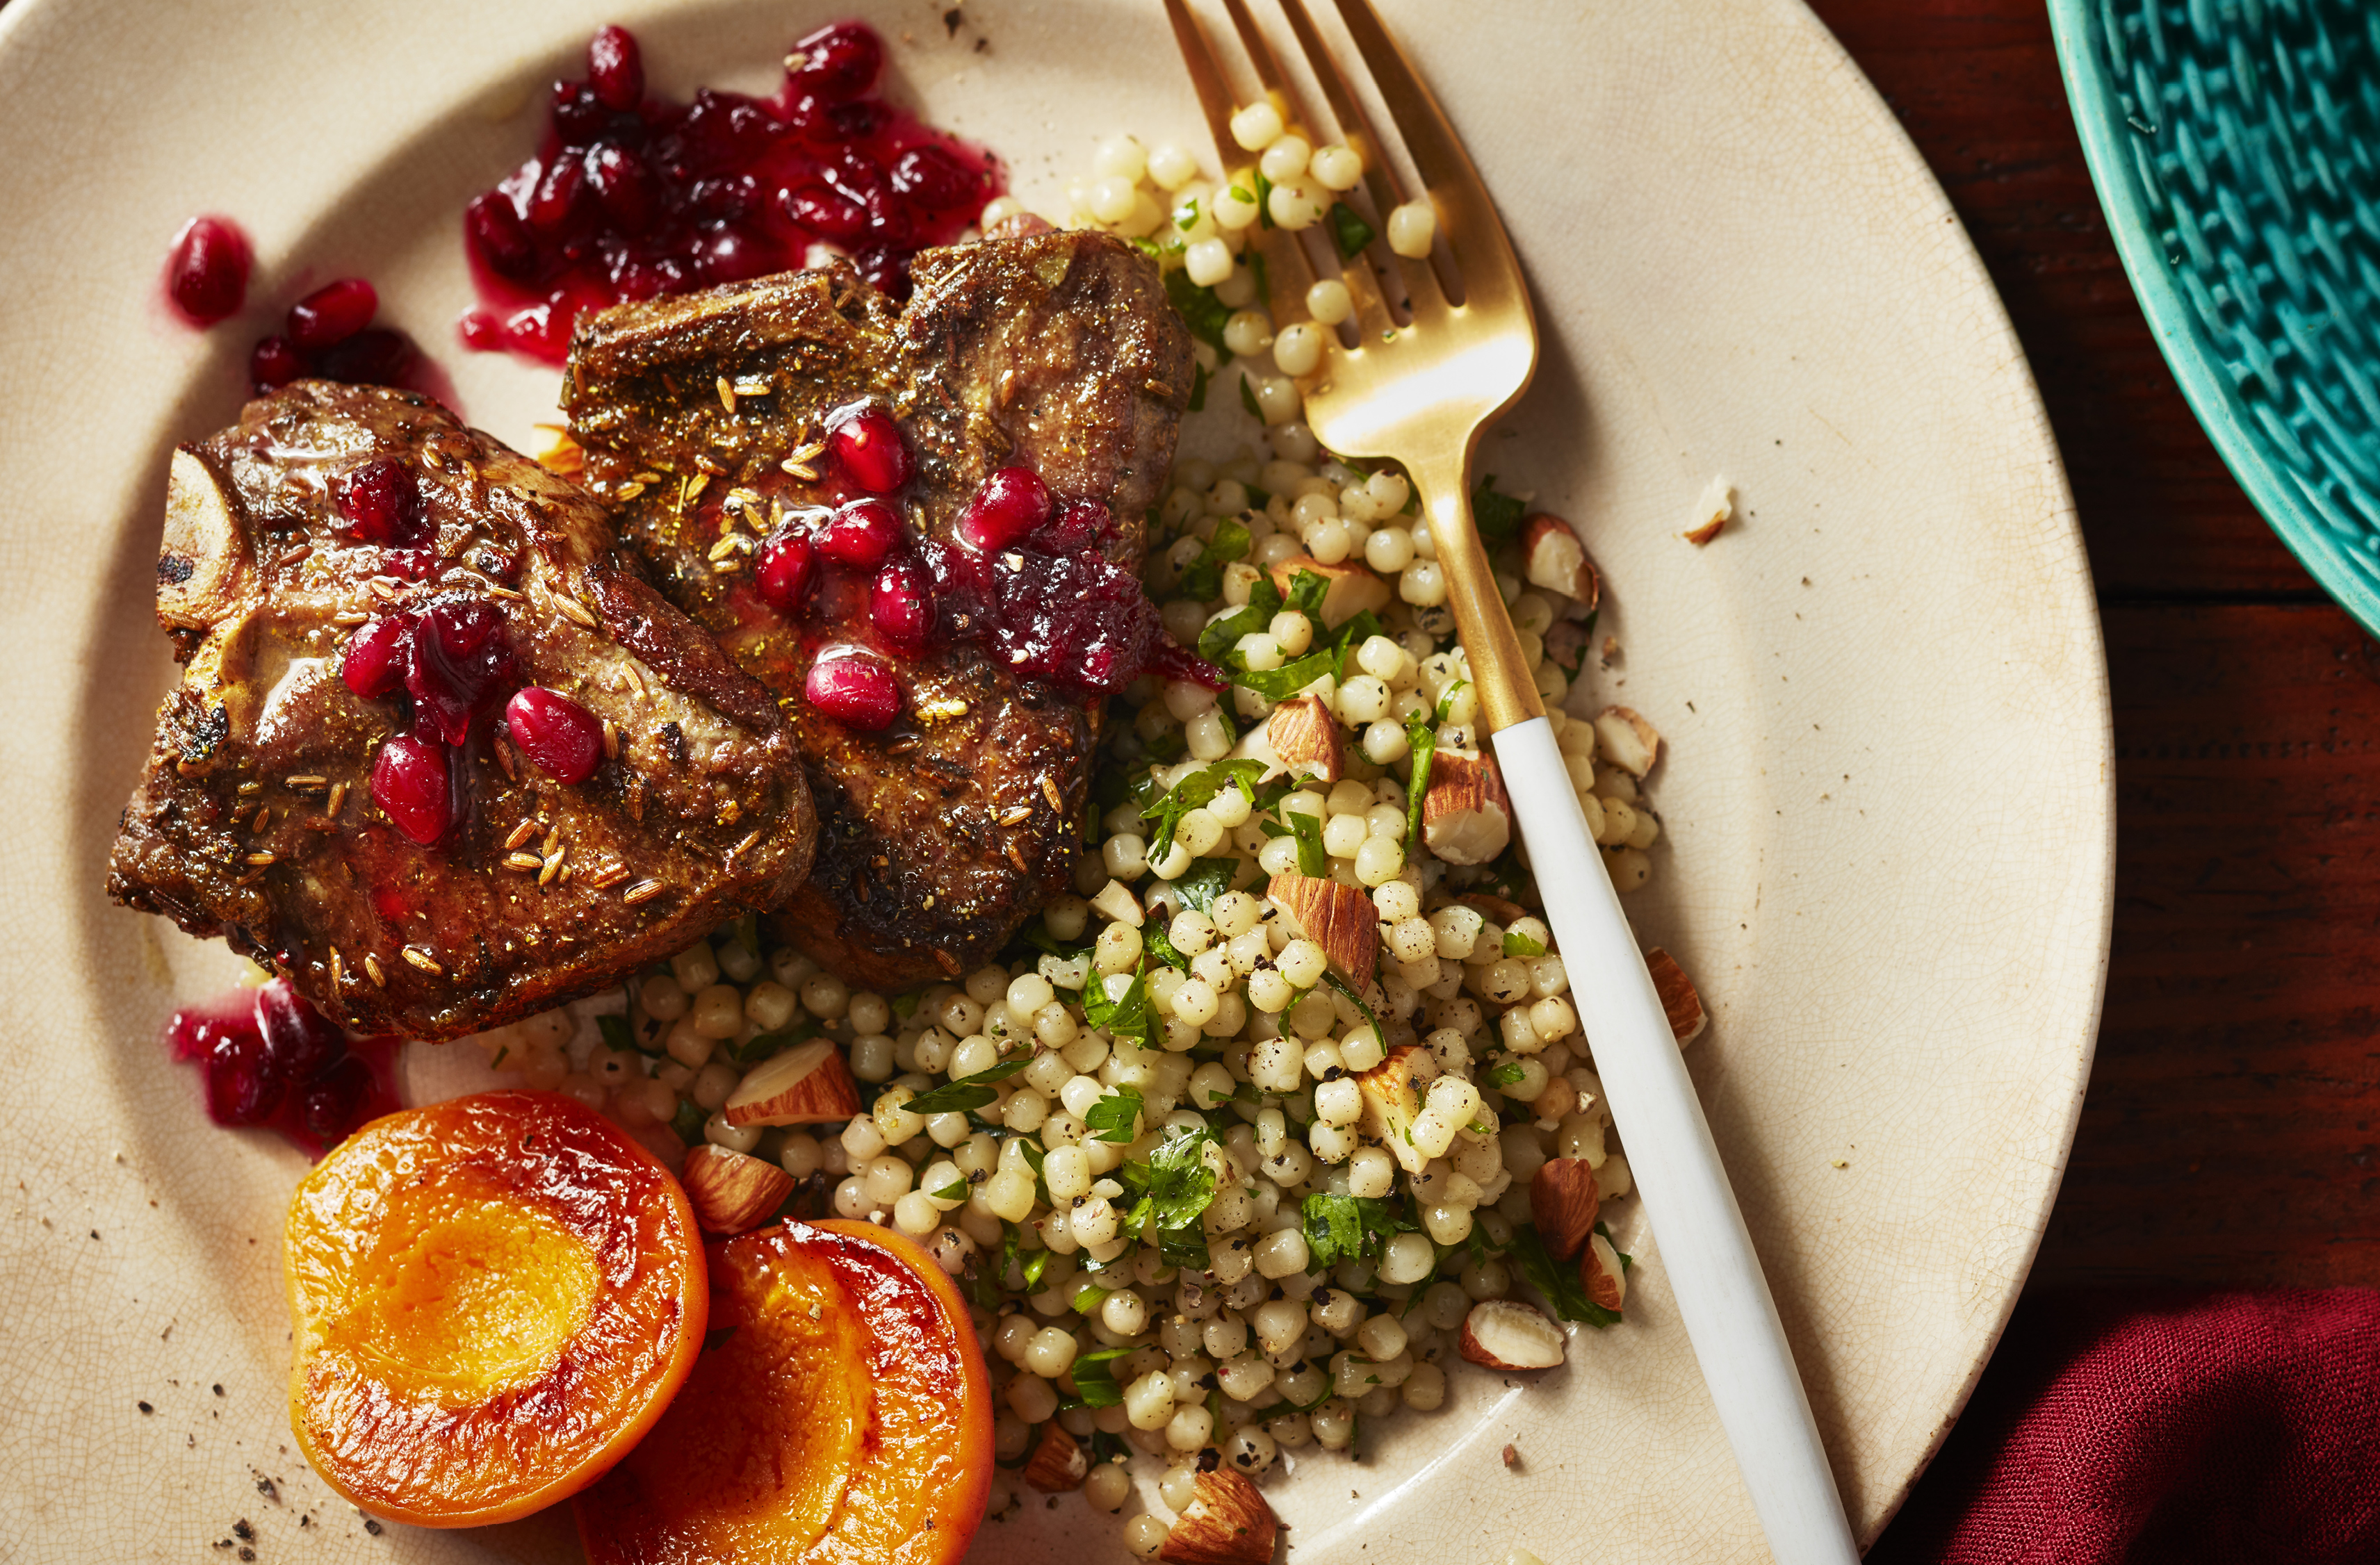 Pomegranate sauce tops lamb chops beside peach and Israeli couscous salad
